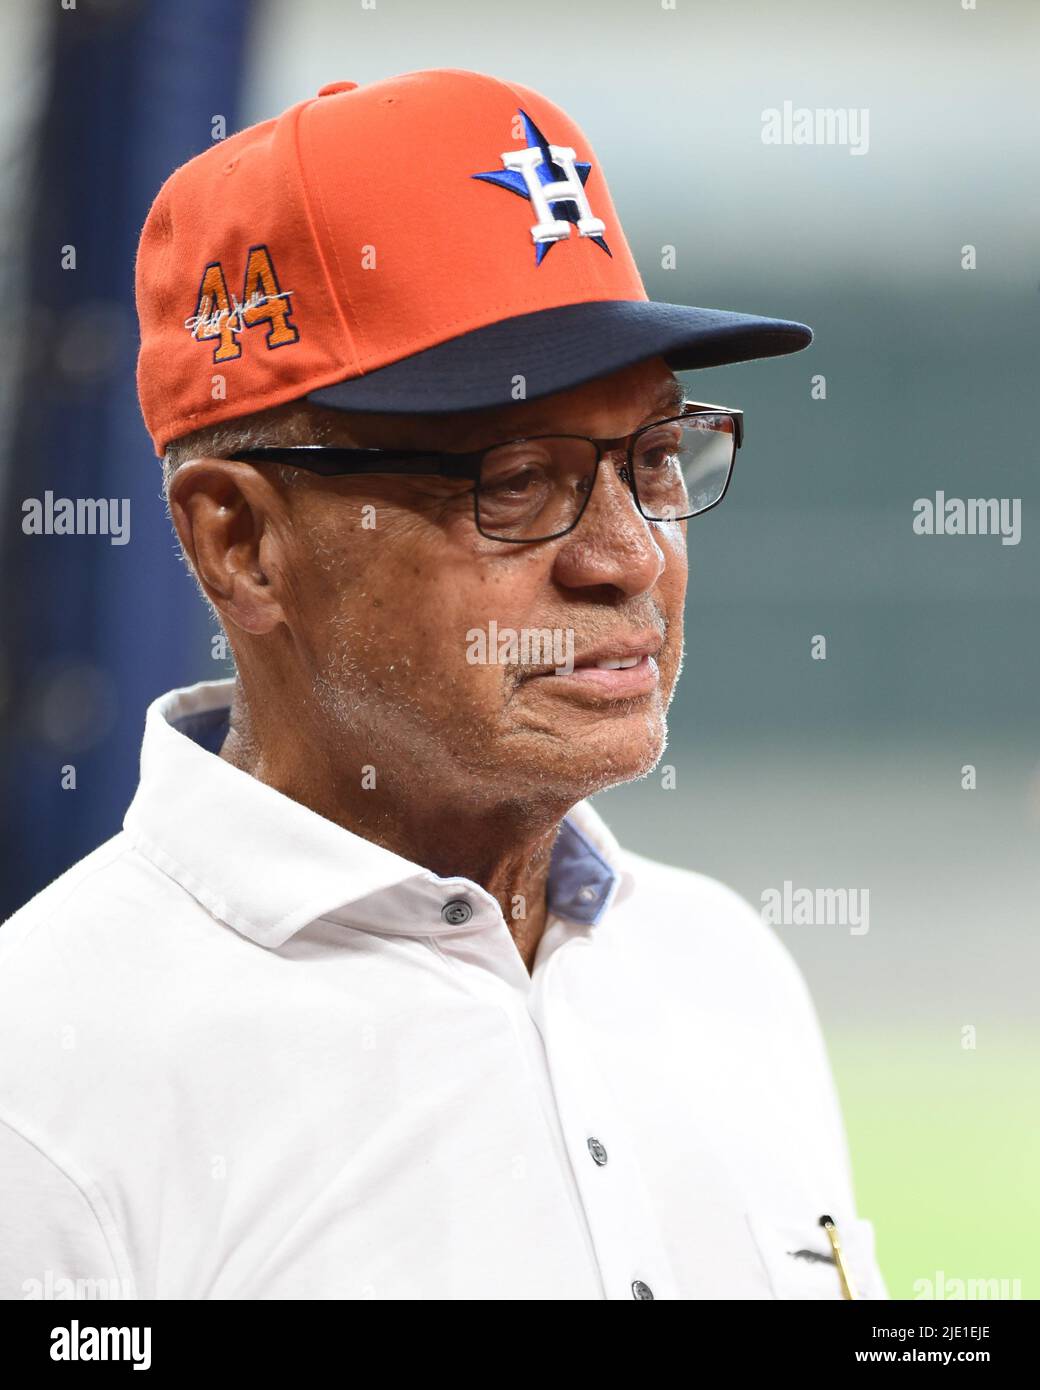 Mr. October, Reggie Jackson at the MLB game between the Houston